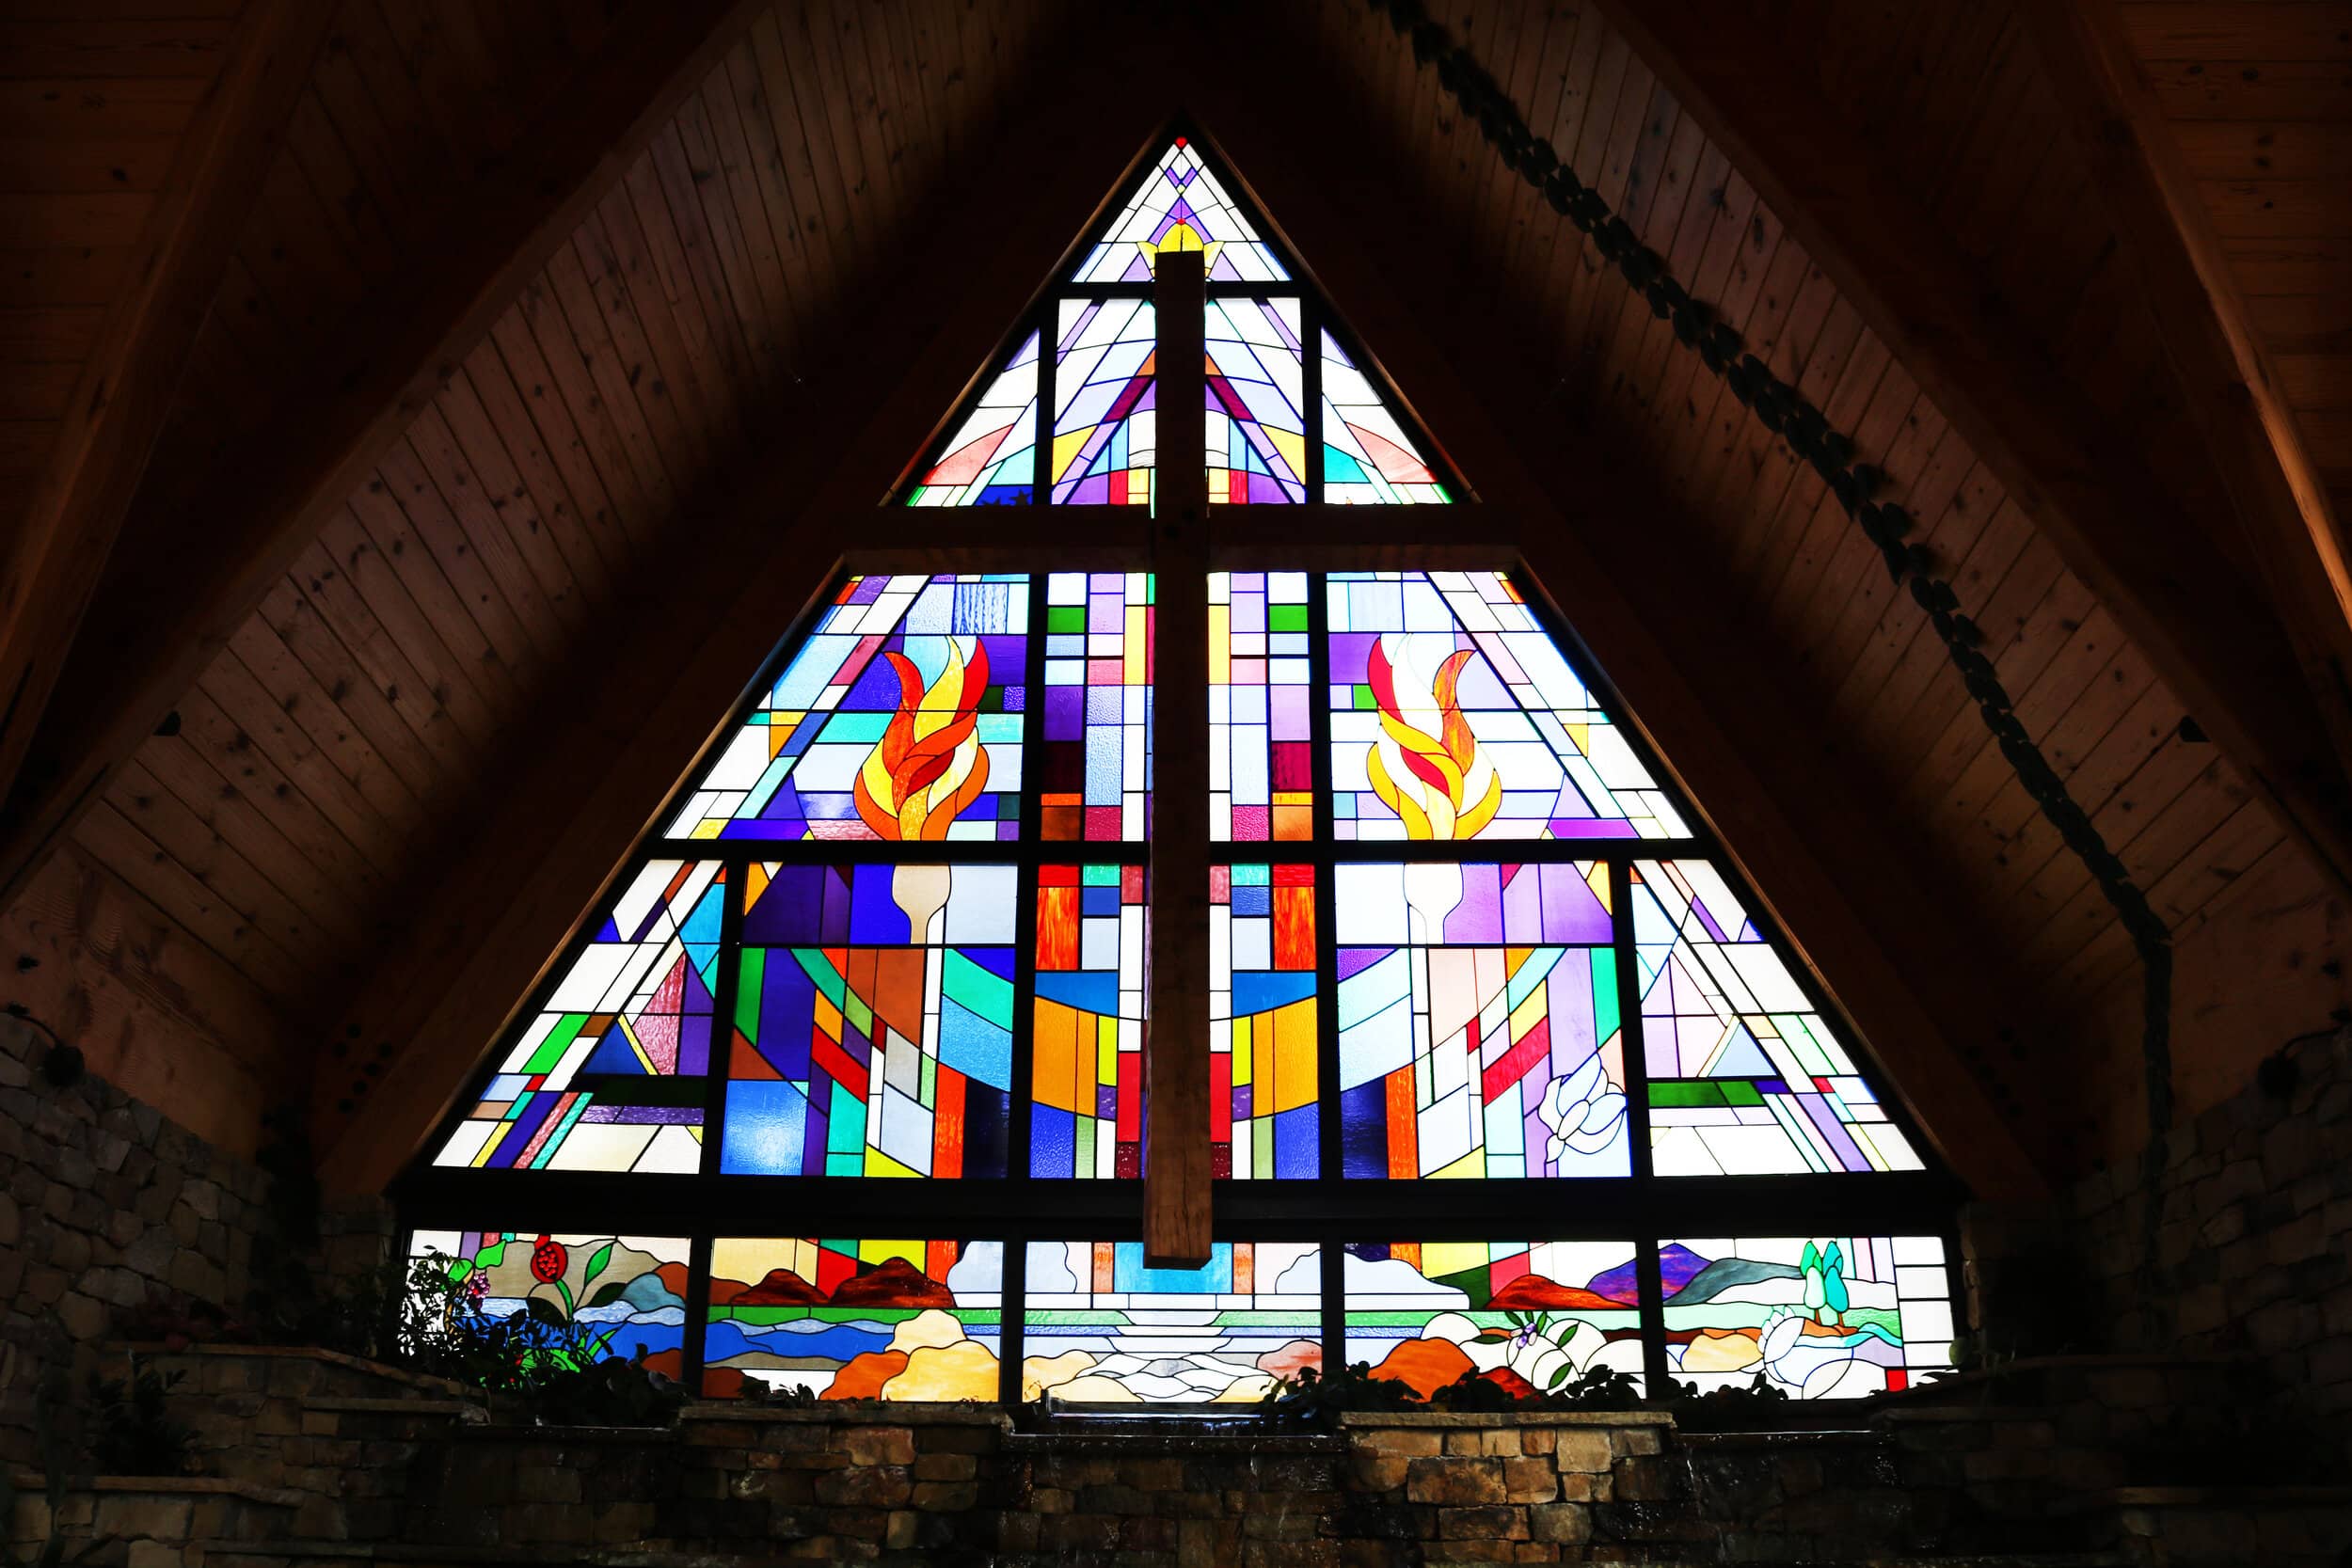 The stained glass window that depicts different verses from the Bible. To the left of the stained glass window, there is a plaque depicting the different meanings and verses of some of the symbols in the stained glass.